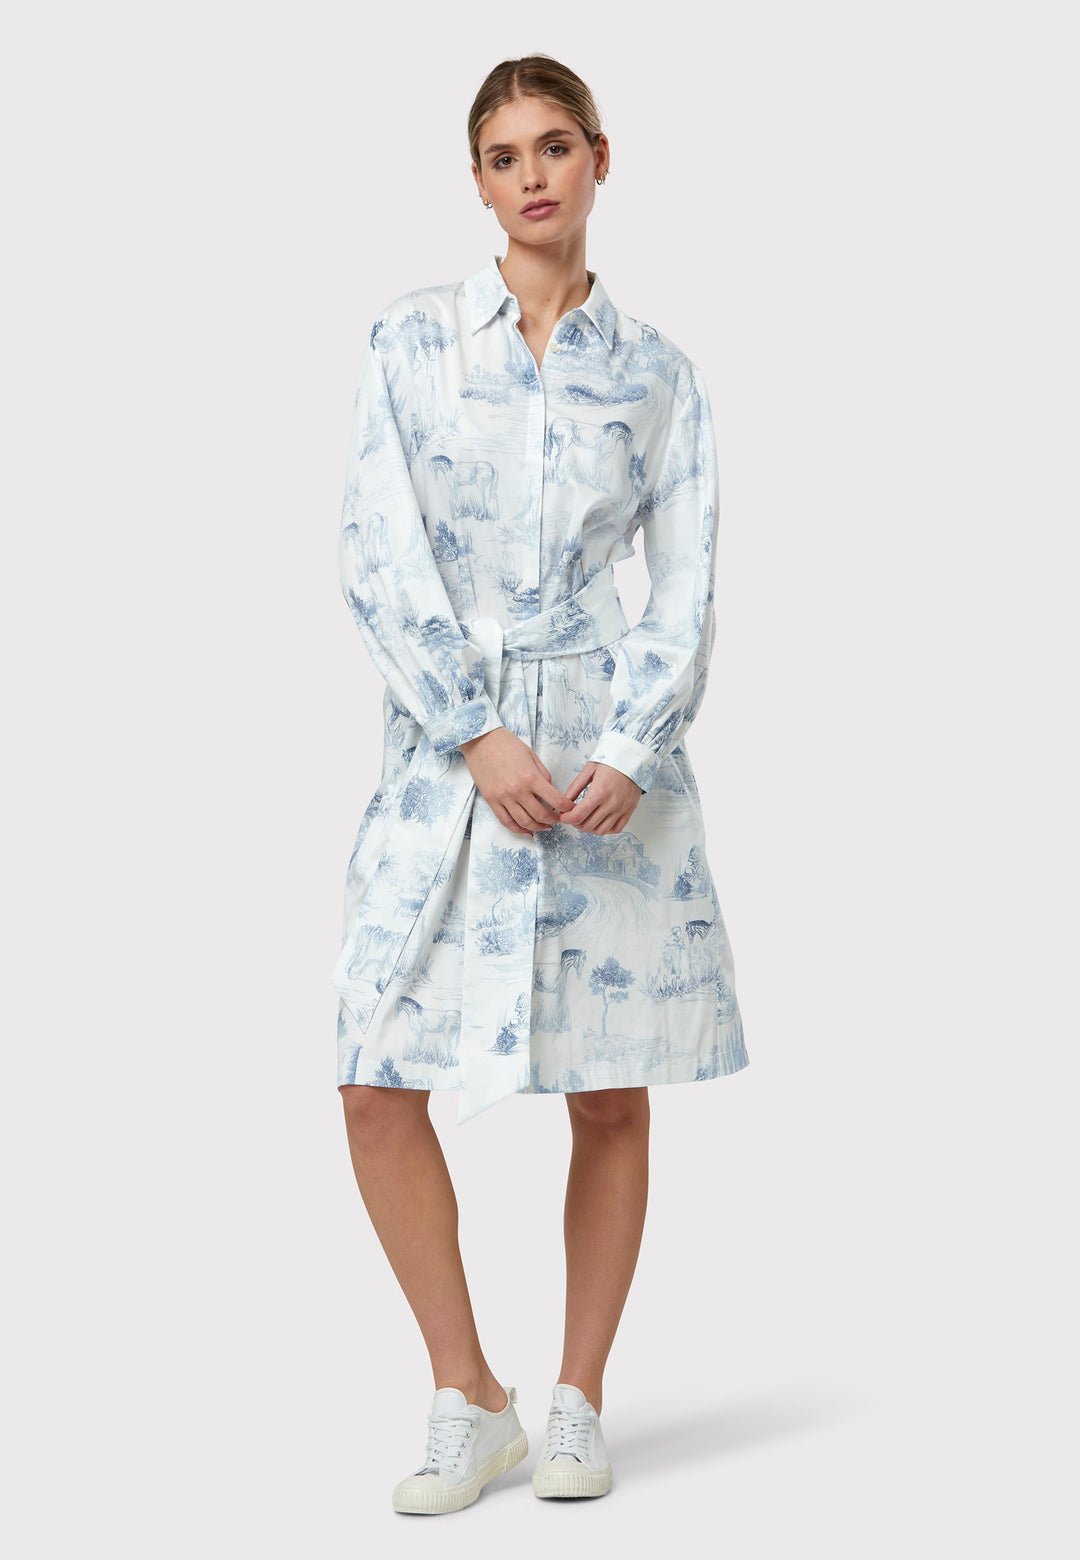 Opt for Odette. Crafted from crisp cotton in a blue and white toile de Jouy print, this easy-fit shirtdress favouriteversatile style. Accentuate your waist with the matching belt for a tailored look that flatters the silhouette. Whether styled as a dress or worn open over your favourite summer trousers, Odette effortlessly combines elegance with comfort for a chic ensemble.